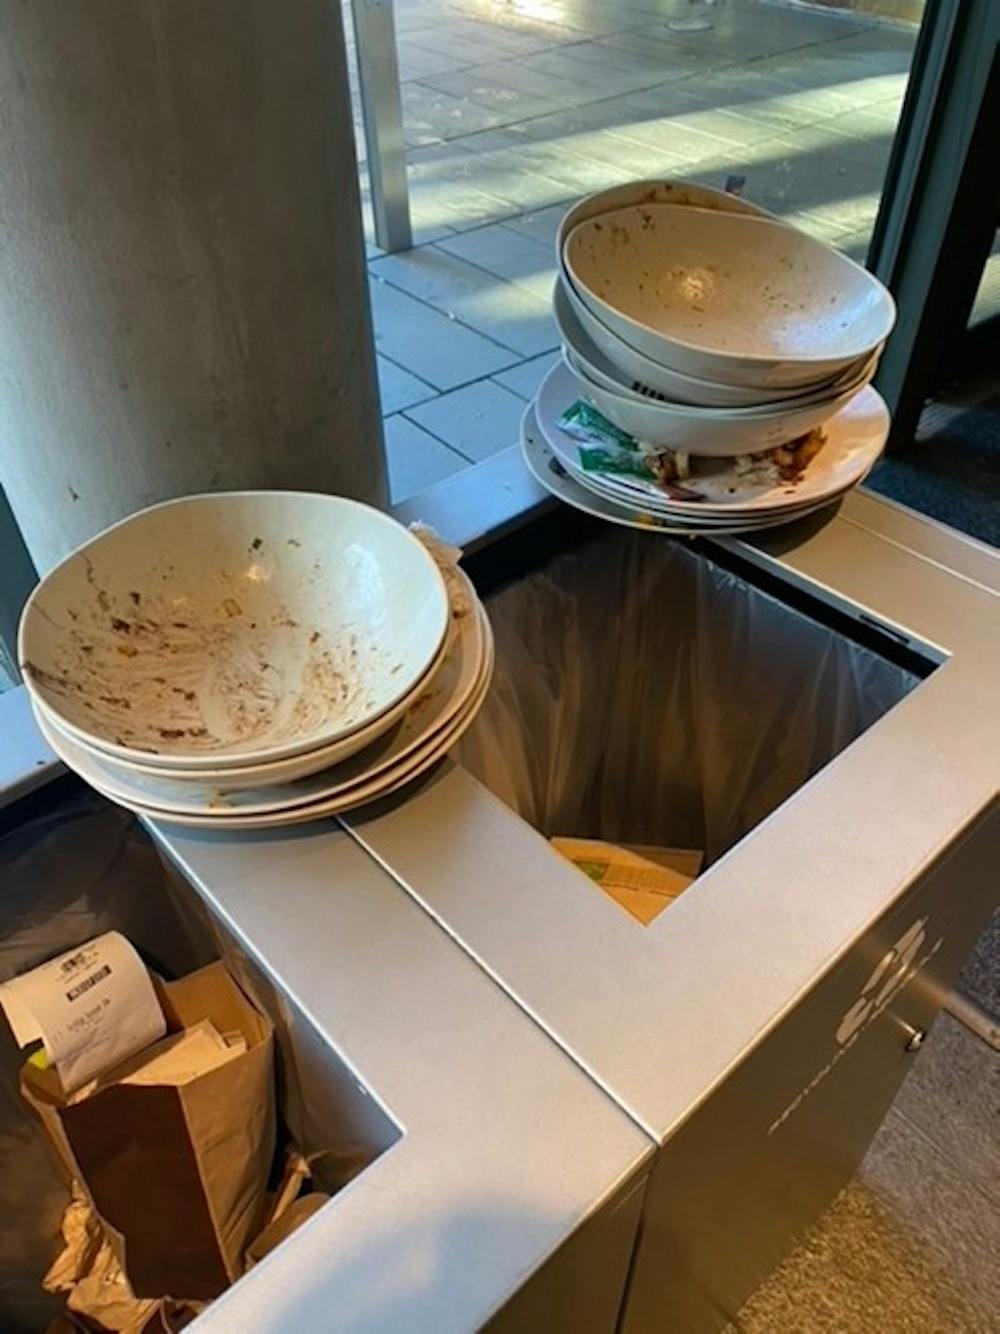 Dirty dishes left by Panera's trashcans